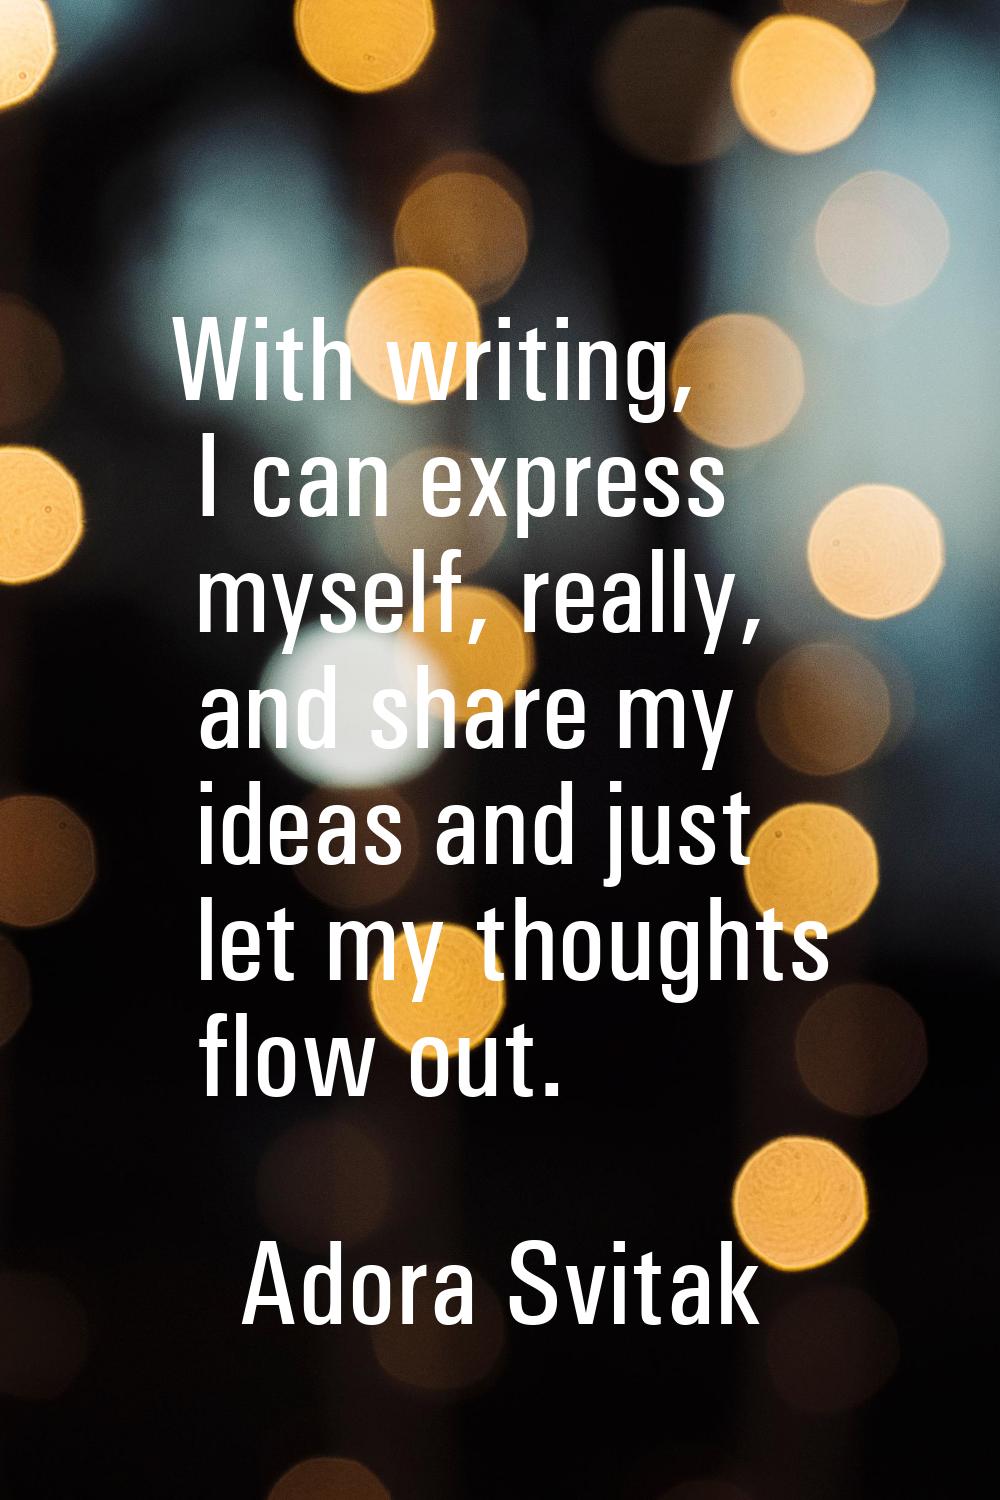 With writing, I can express myself, really, and share my ideas and just let my thoughts flow out.